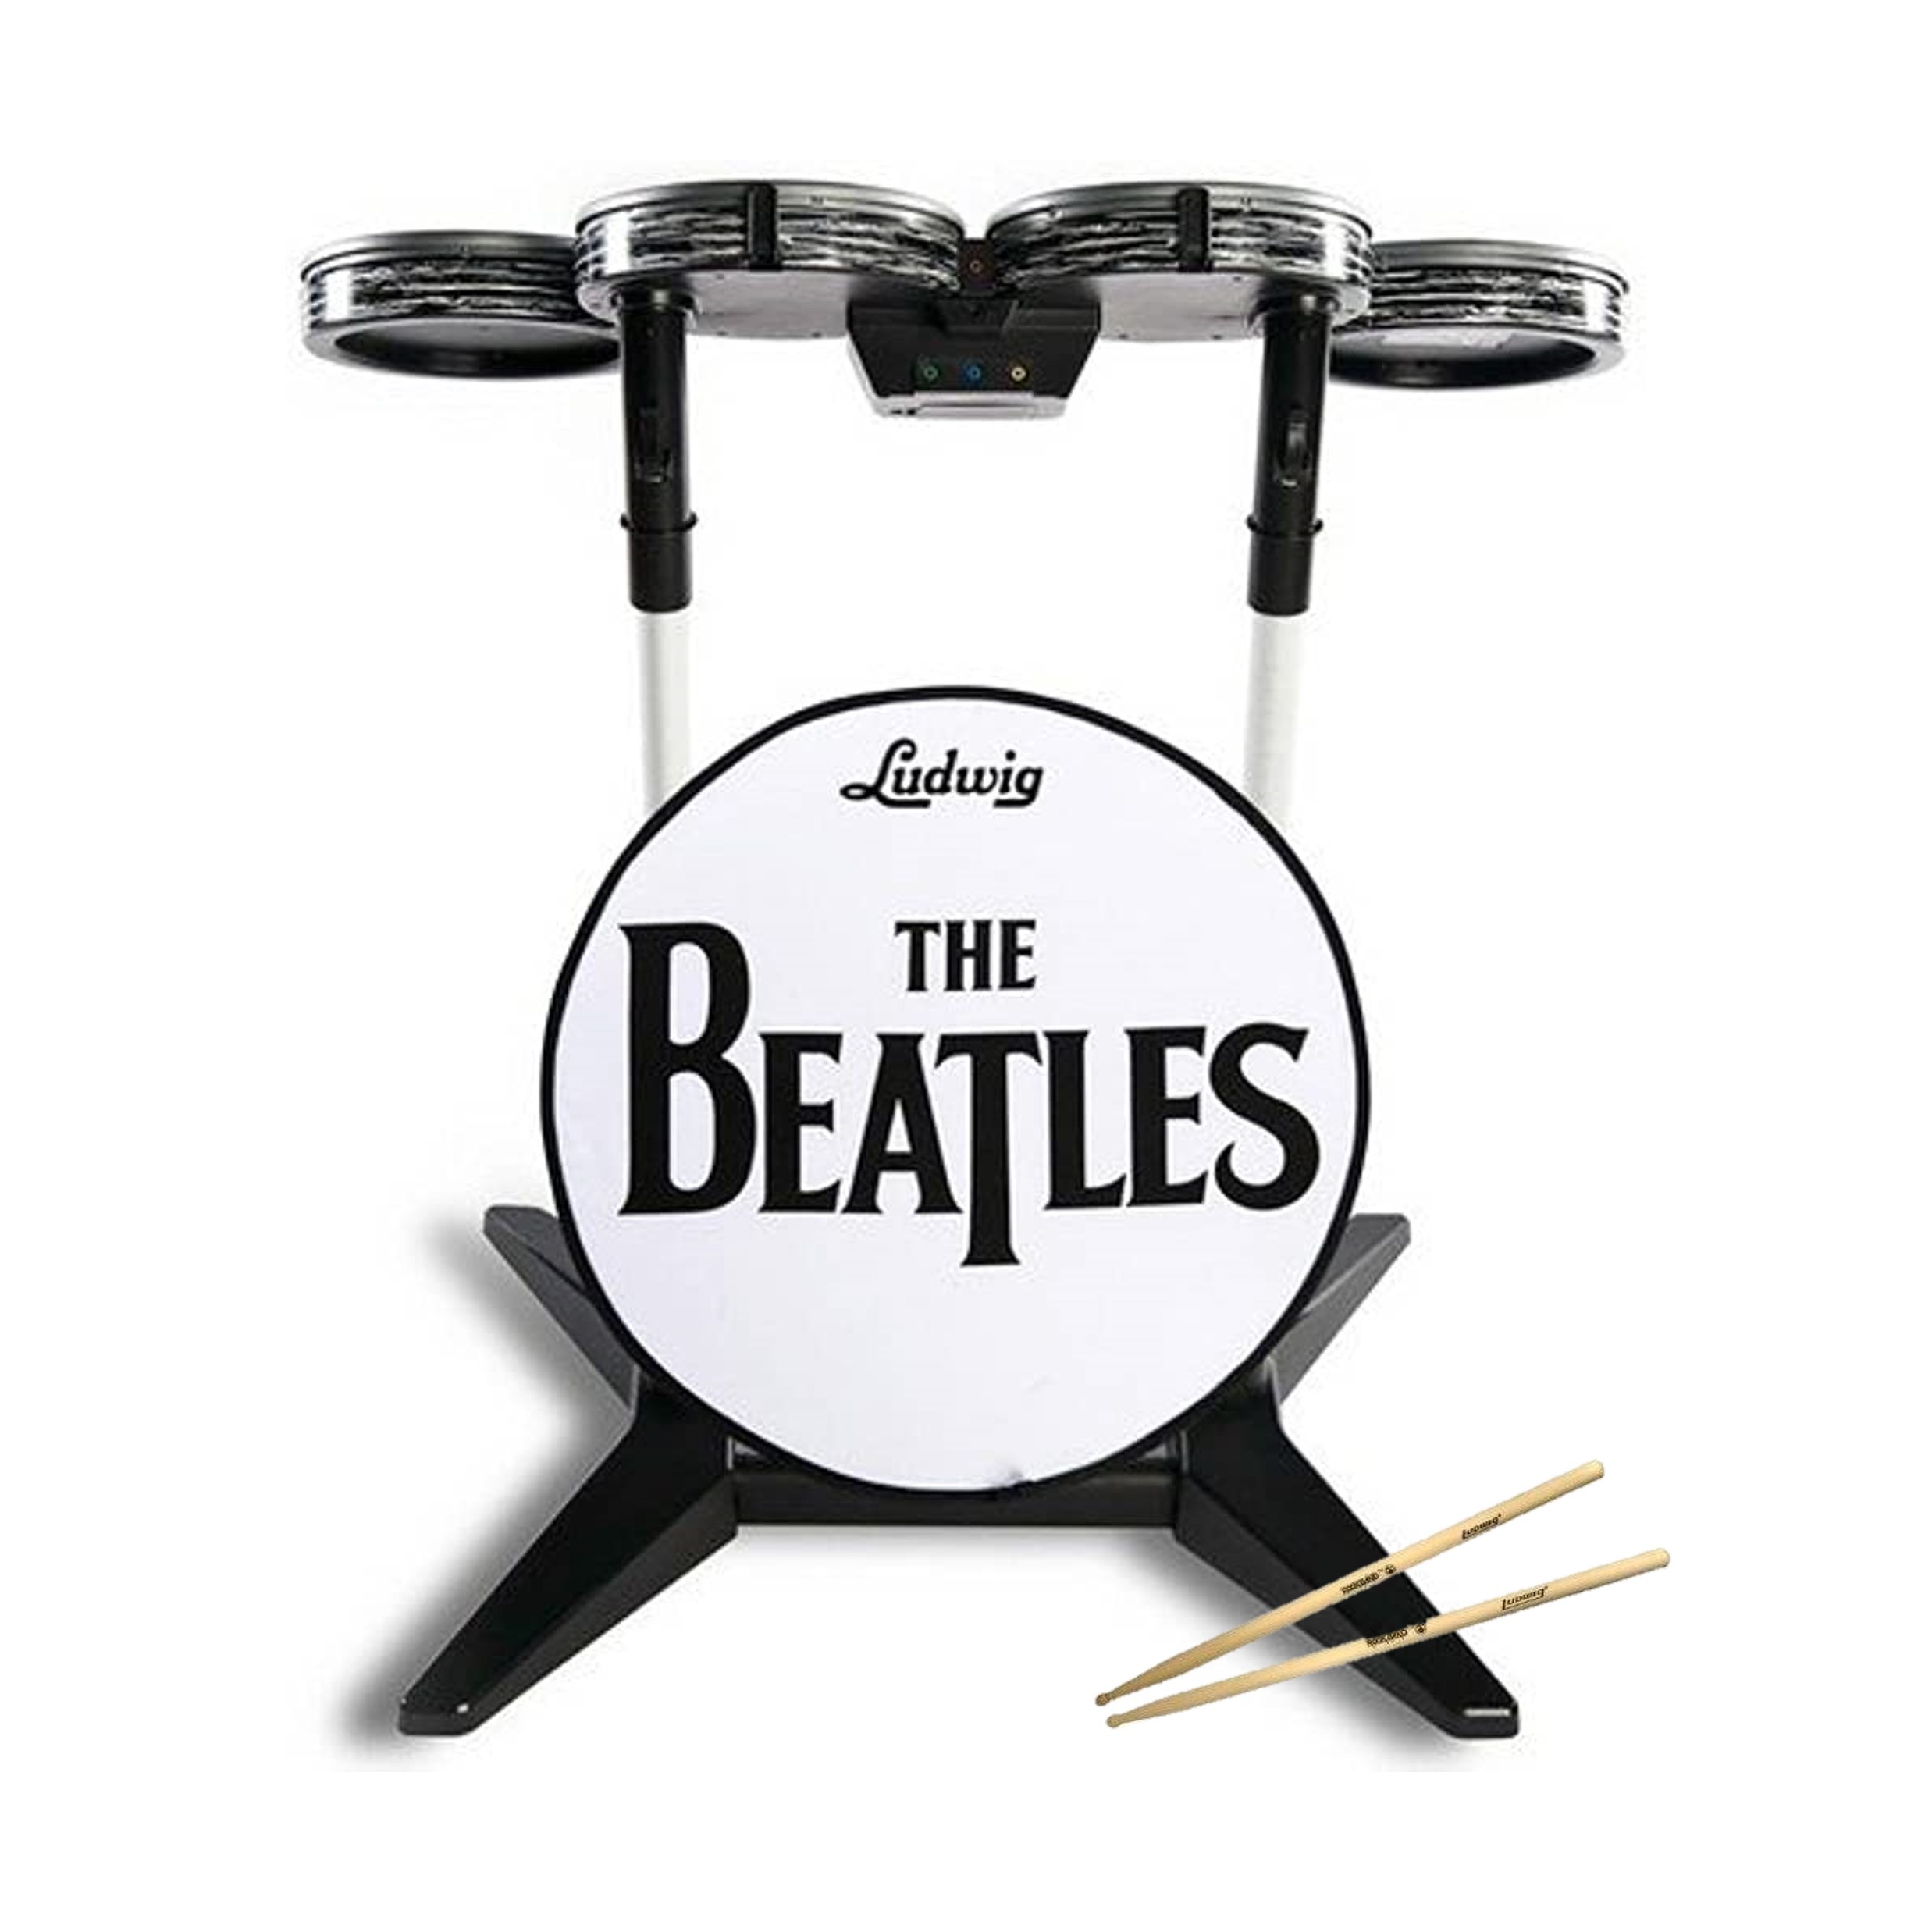 The Beatles Rock Band Drumstel - Xbox 360 Hardware